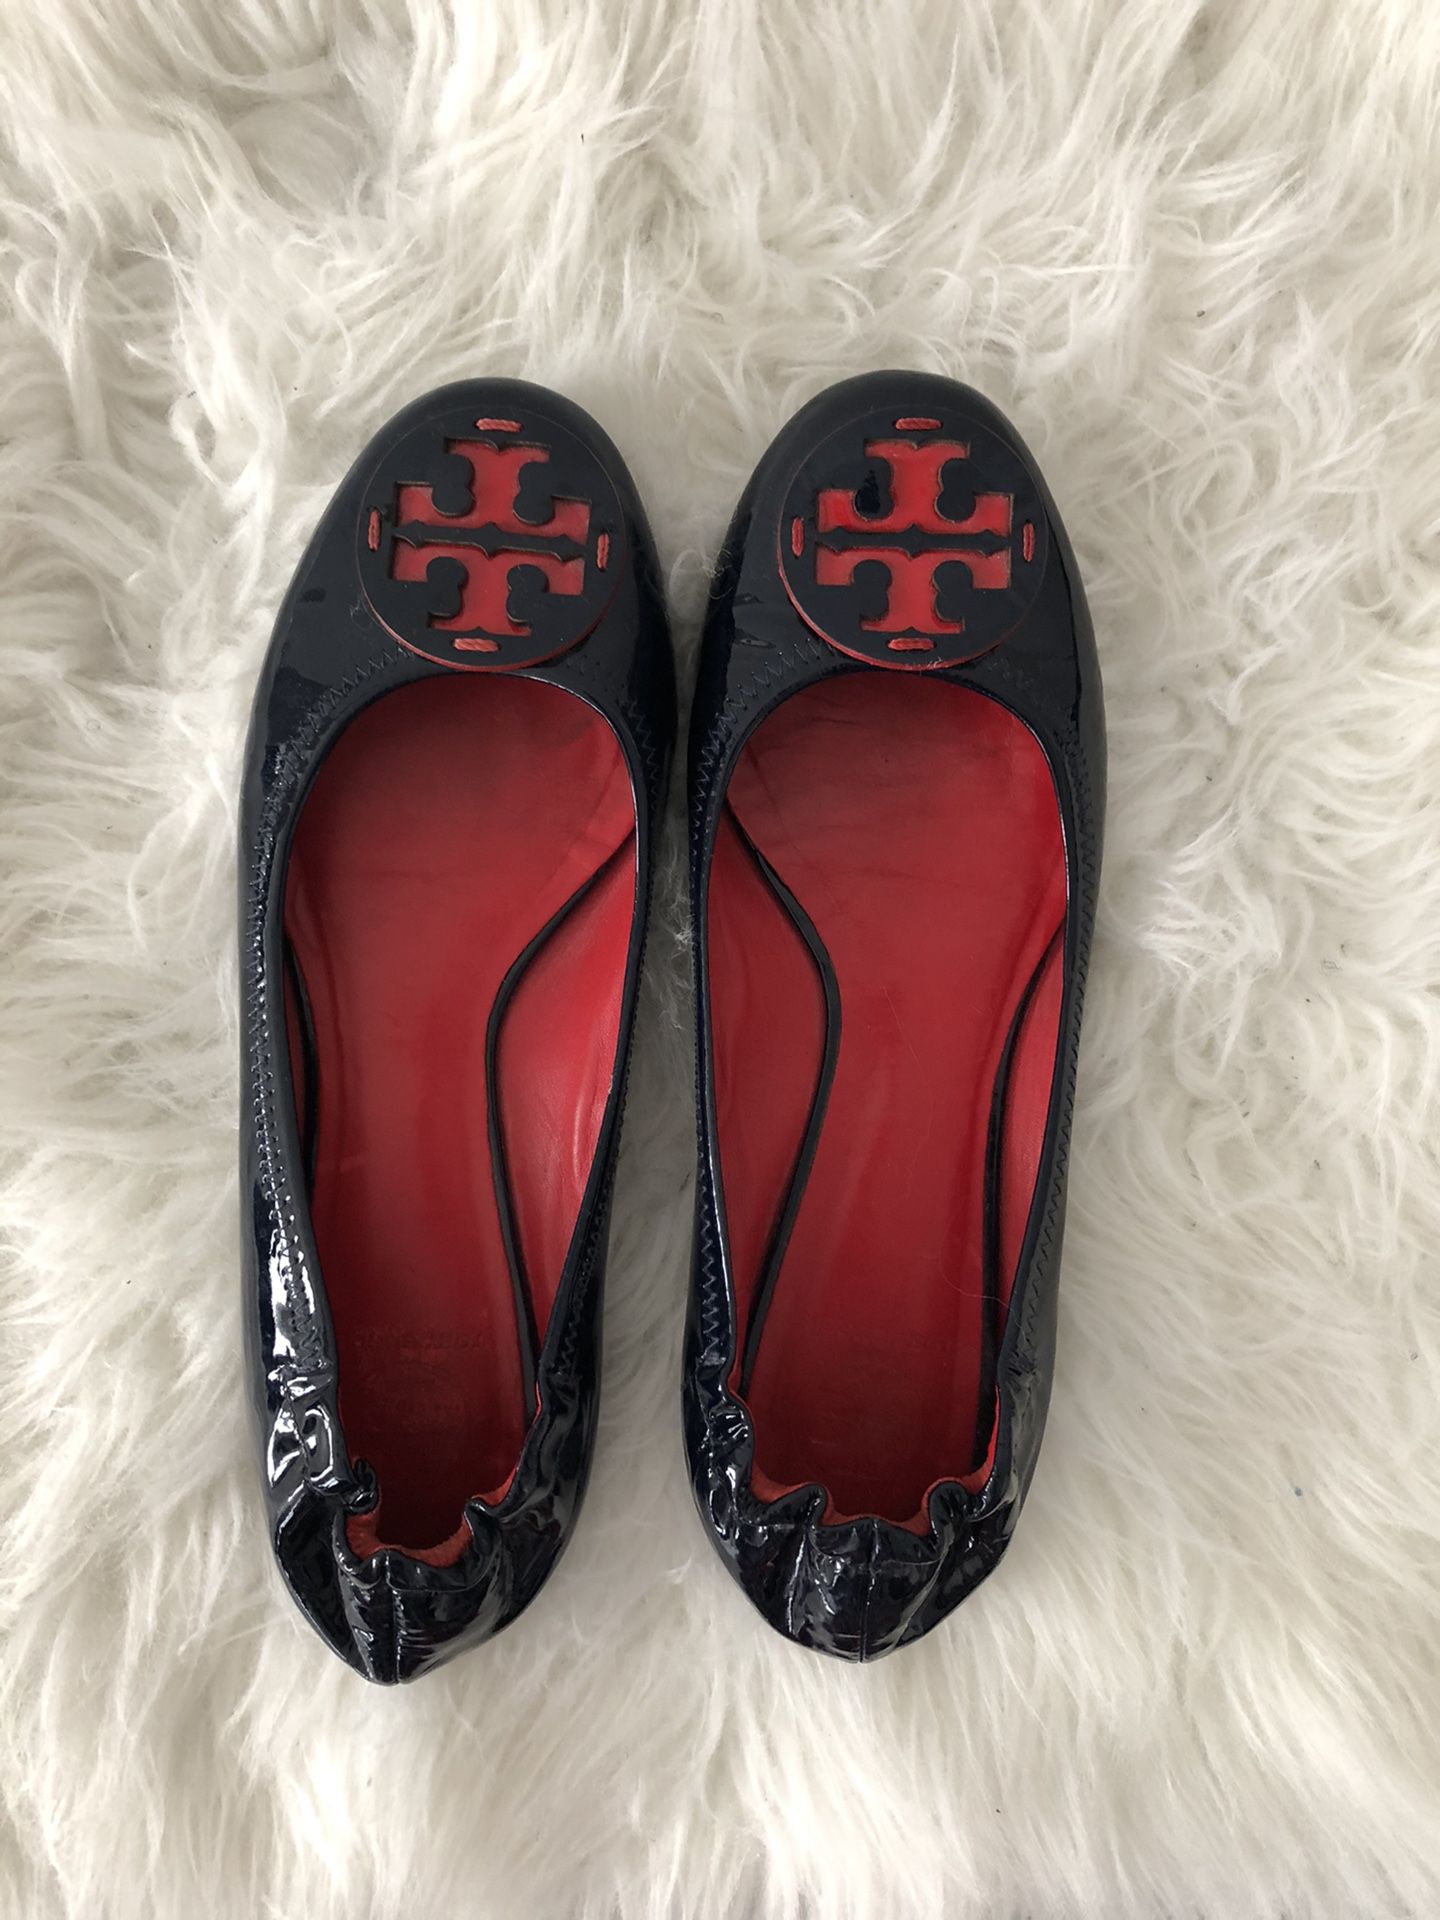 Tory Burch Reva Classic Patent Ballet Flats in Size 10